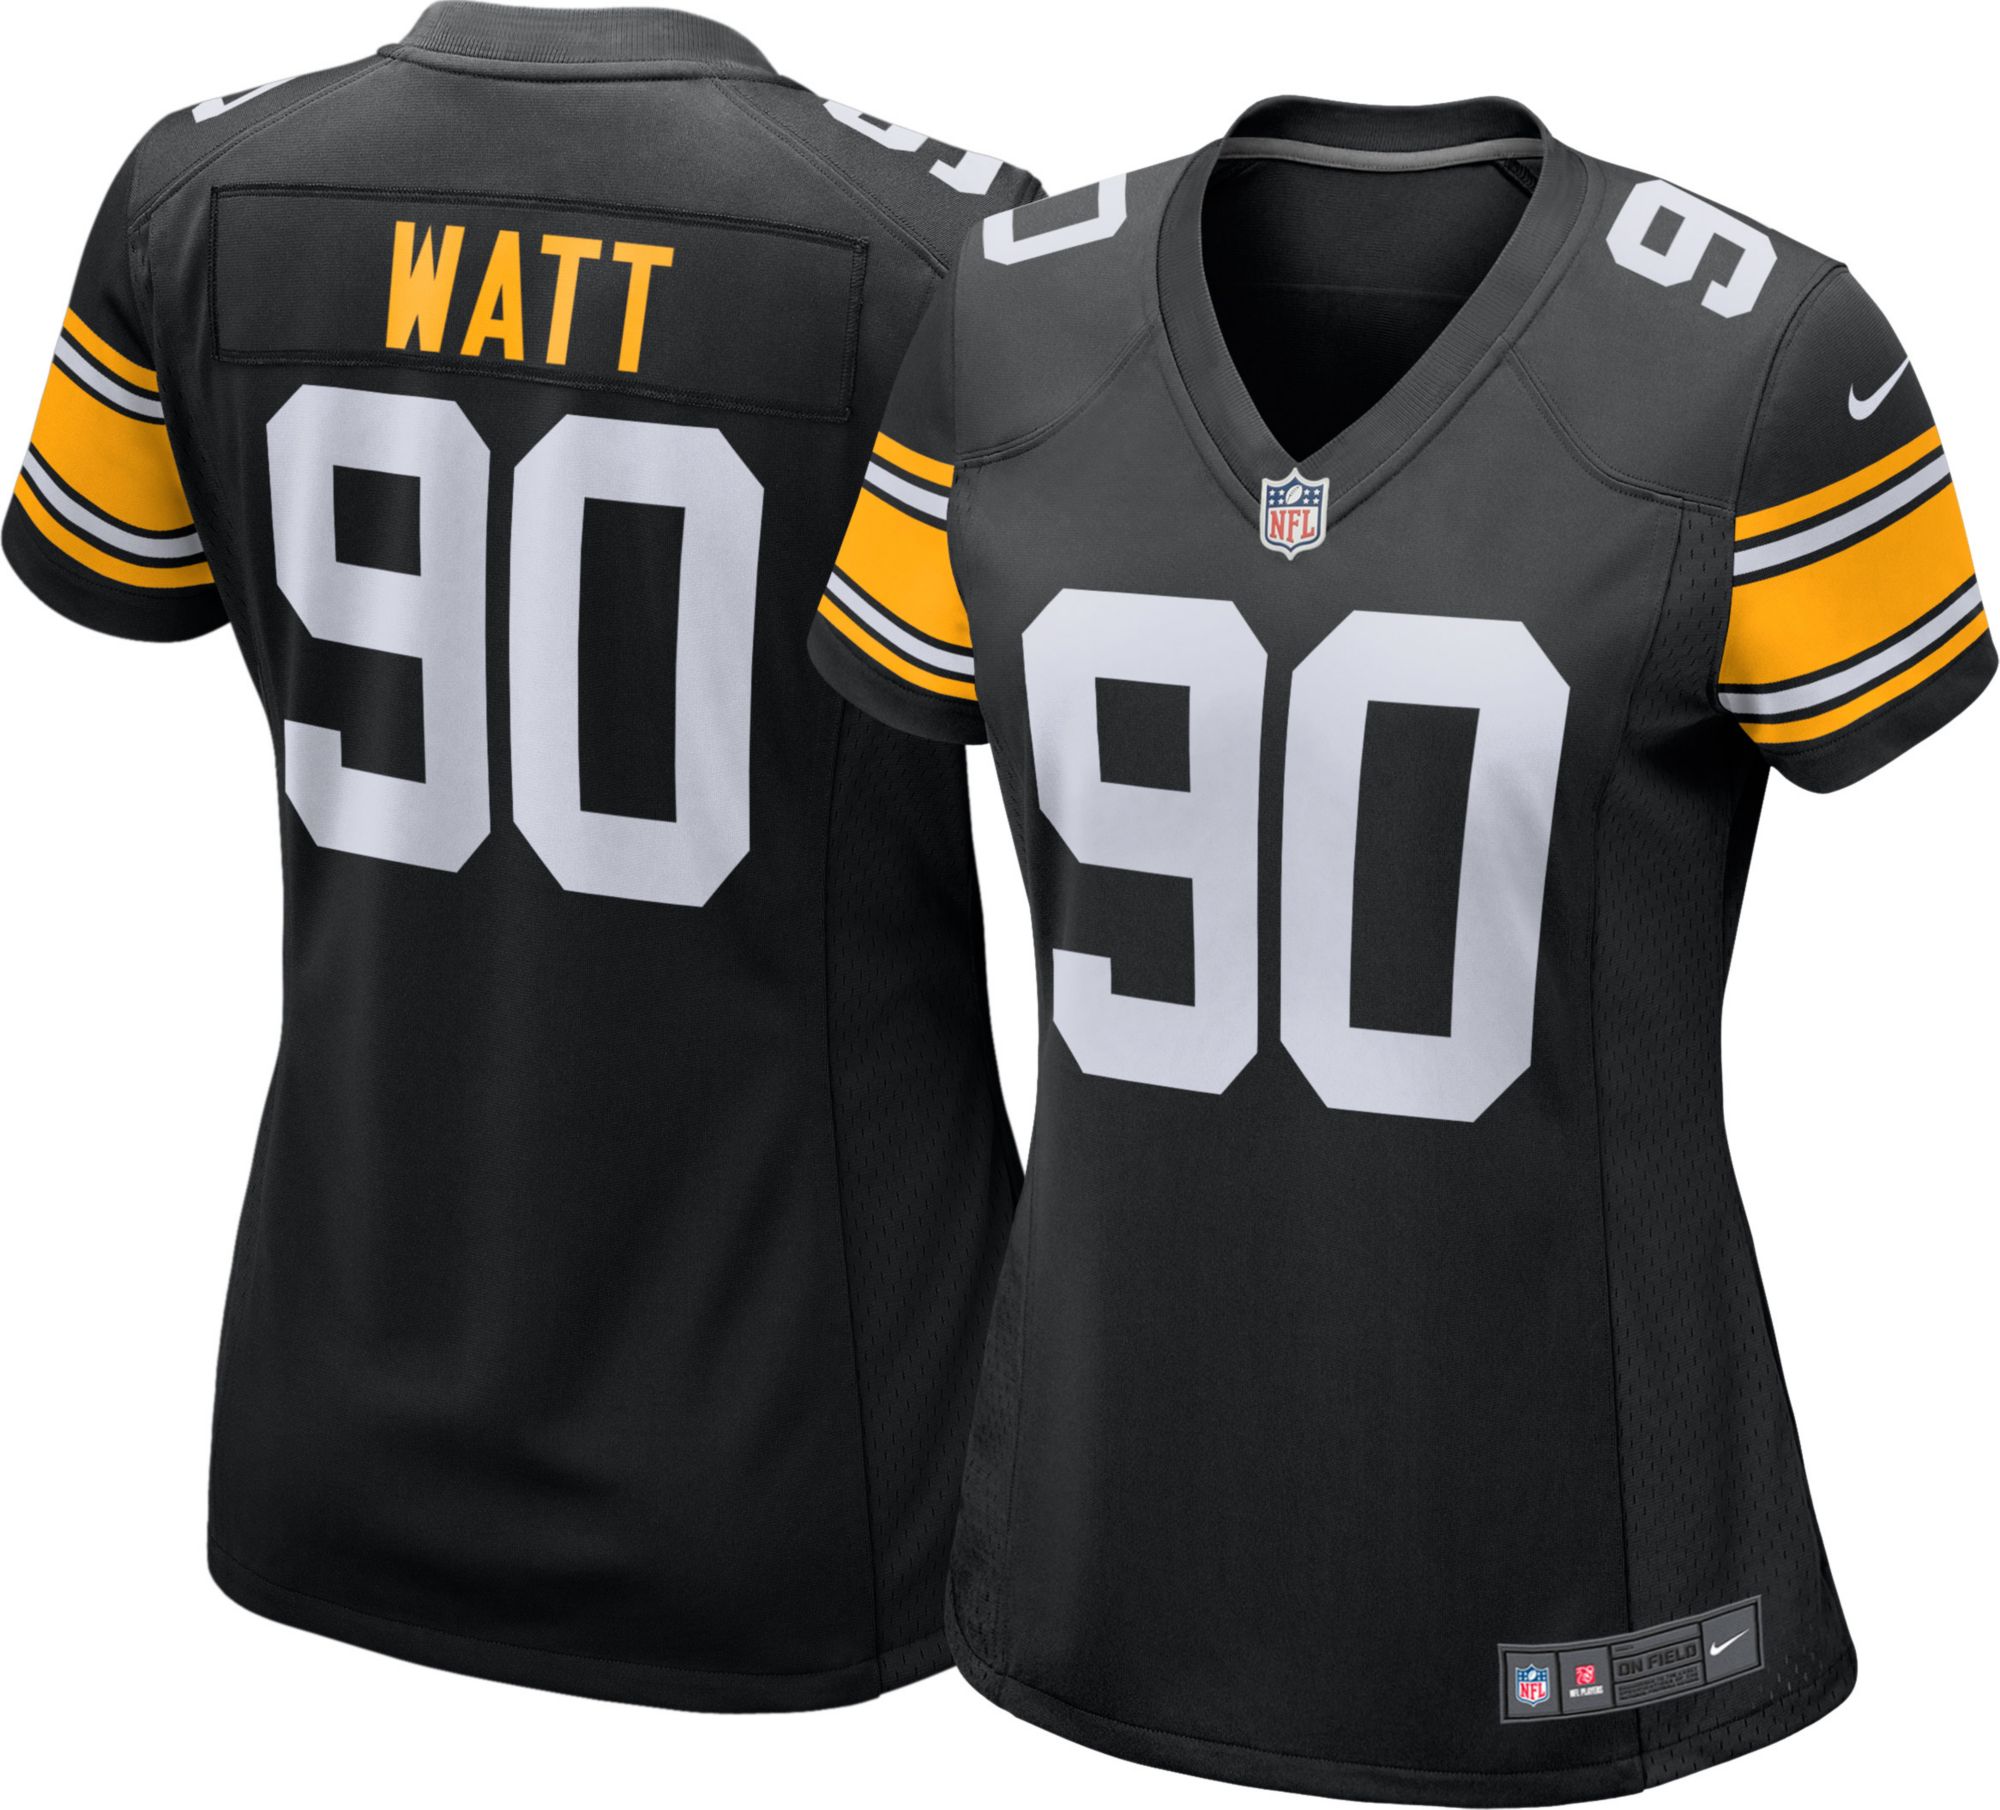 womens throwback steelers jersey